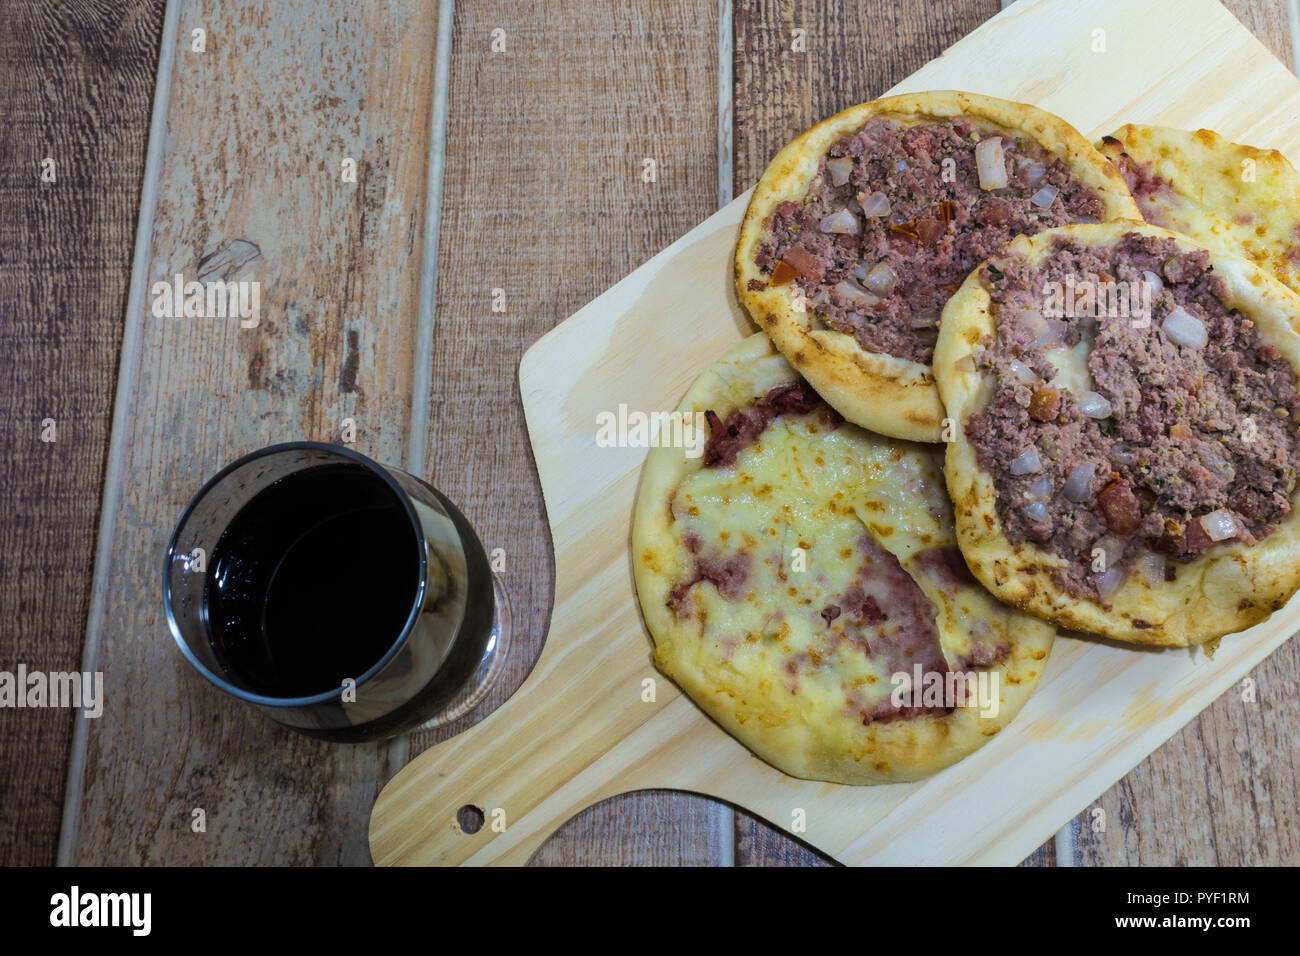 Delicious Arabic Esfiha, with fillings cheese and meat with tomato and onion. Served on a wooden board. Stock Photo